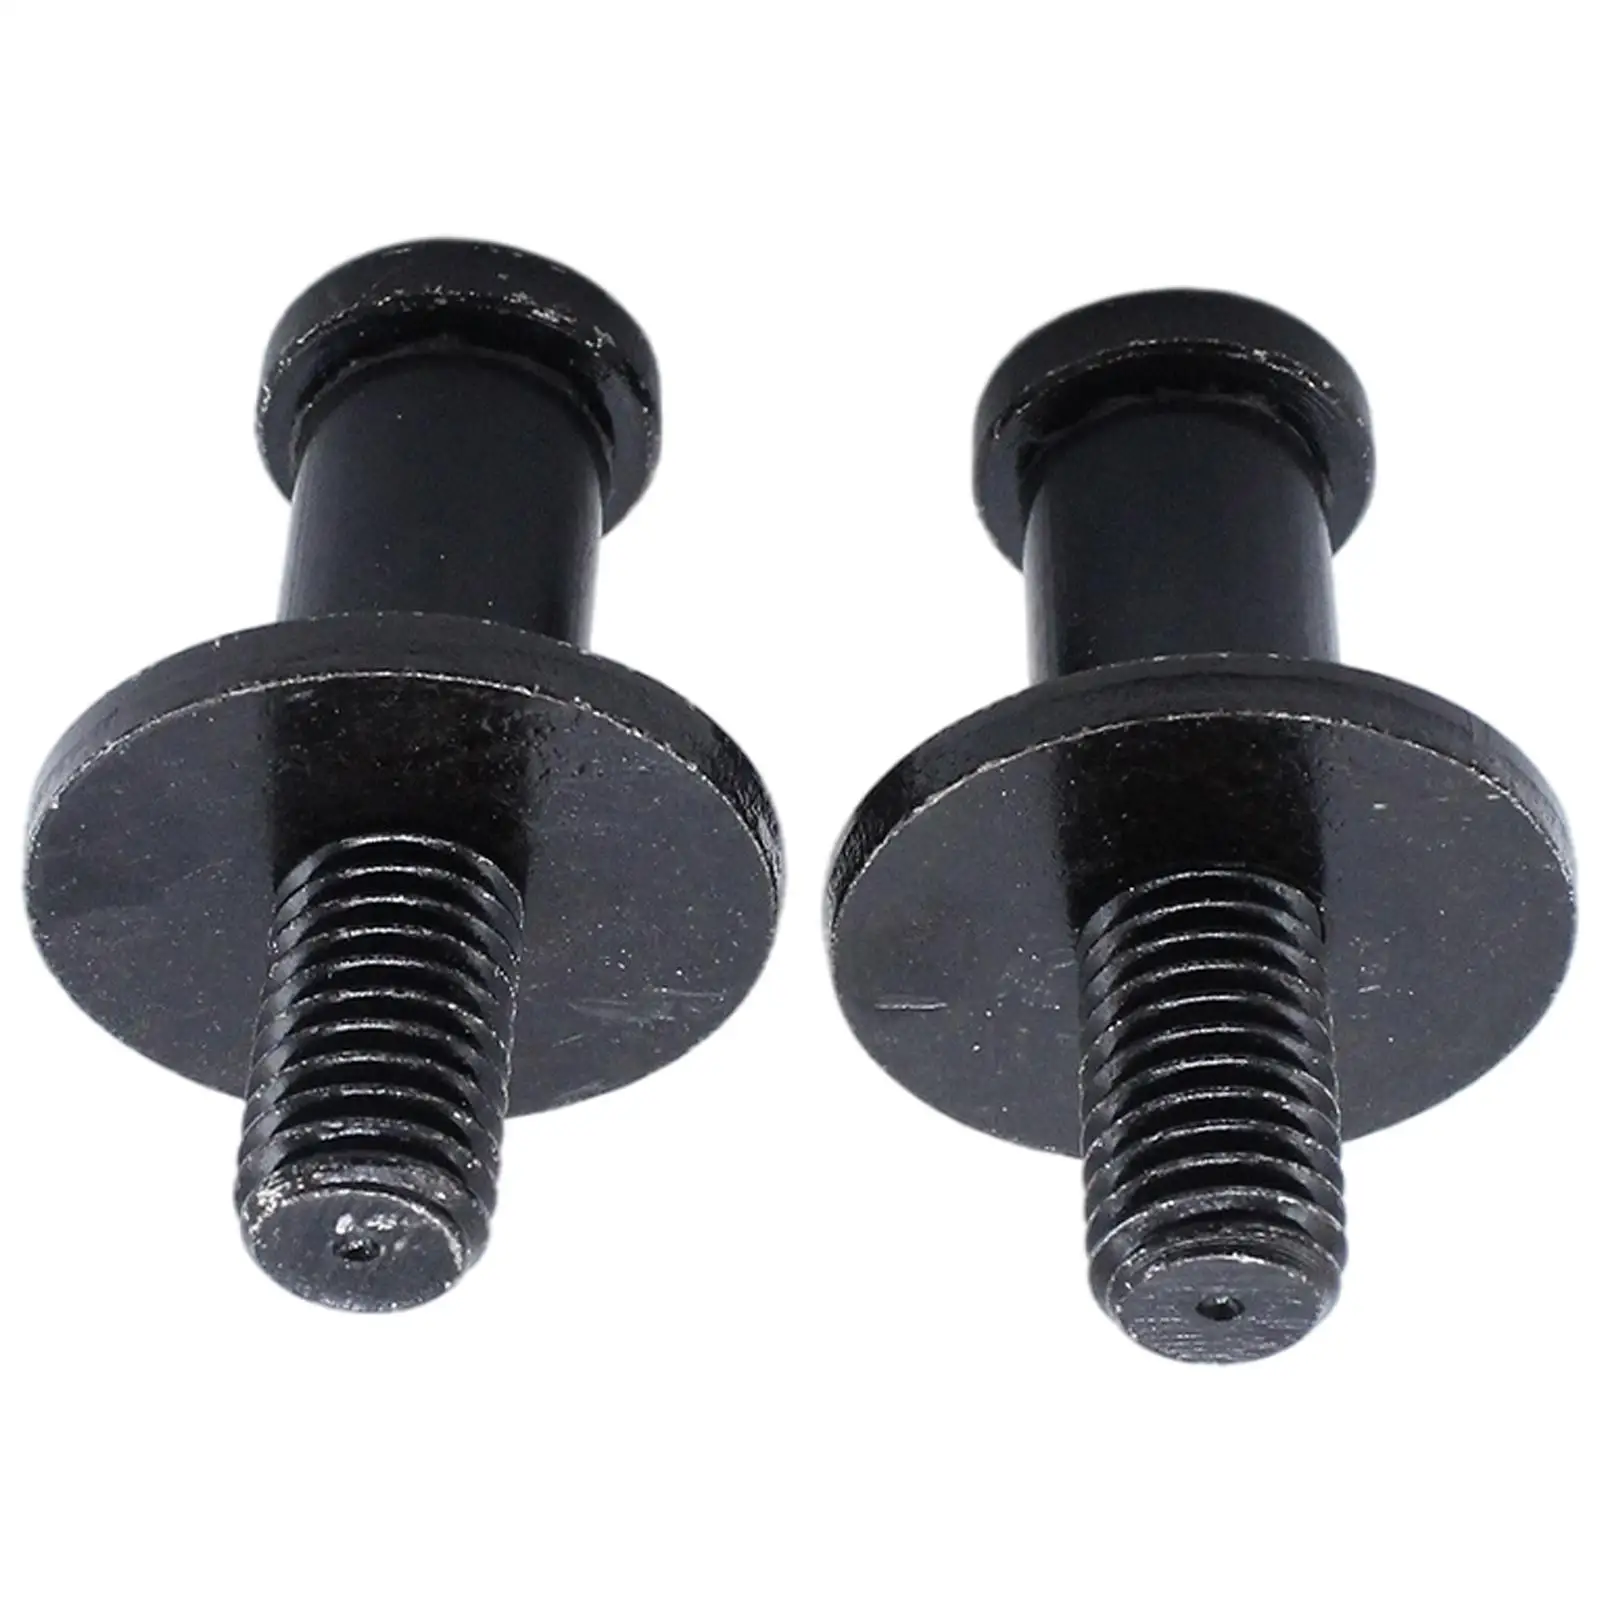 2 Pieces Tailgate Striker Bolt Replace 11570162 Door Latch for      1500 2500 3500 Classic HD  EXT Esv